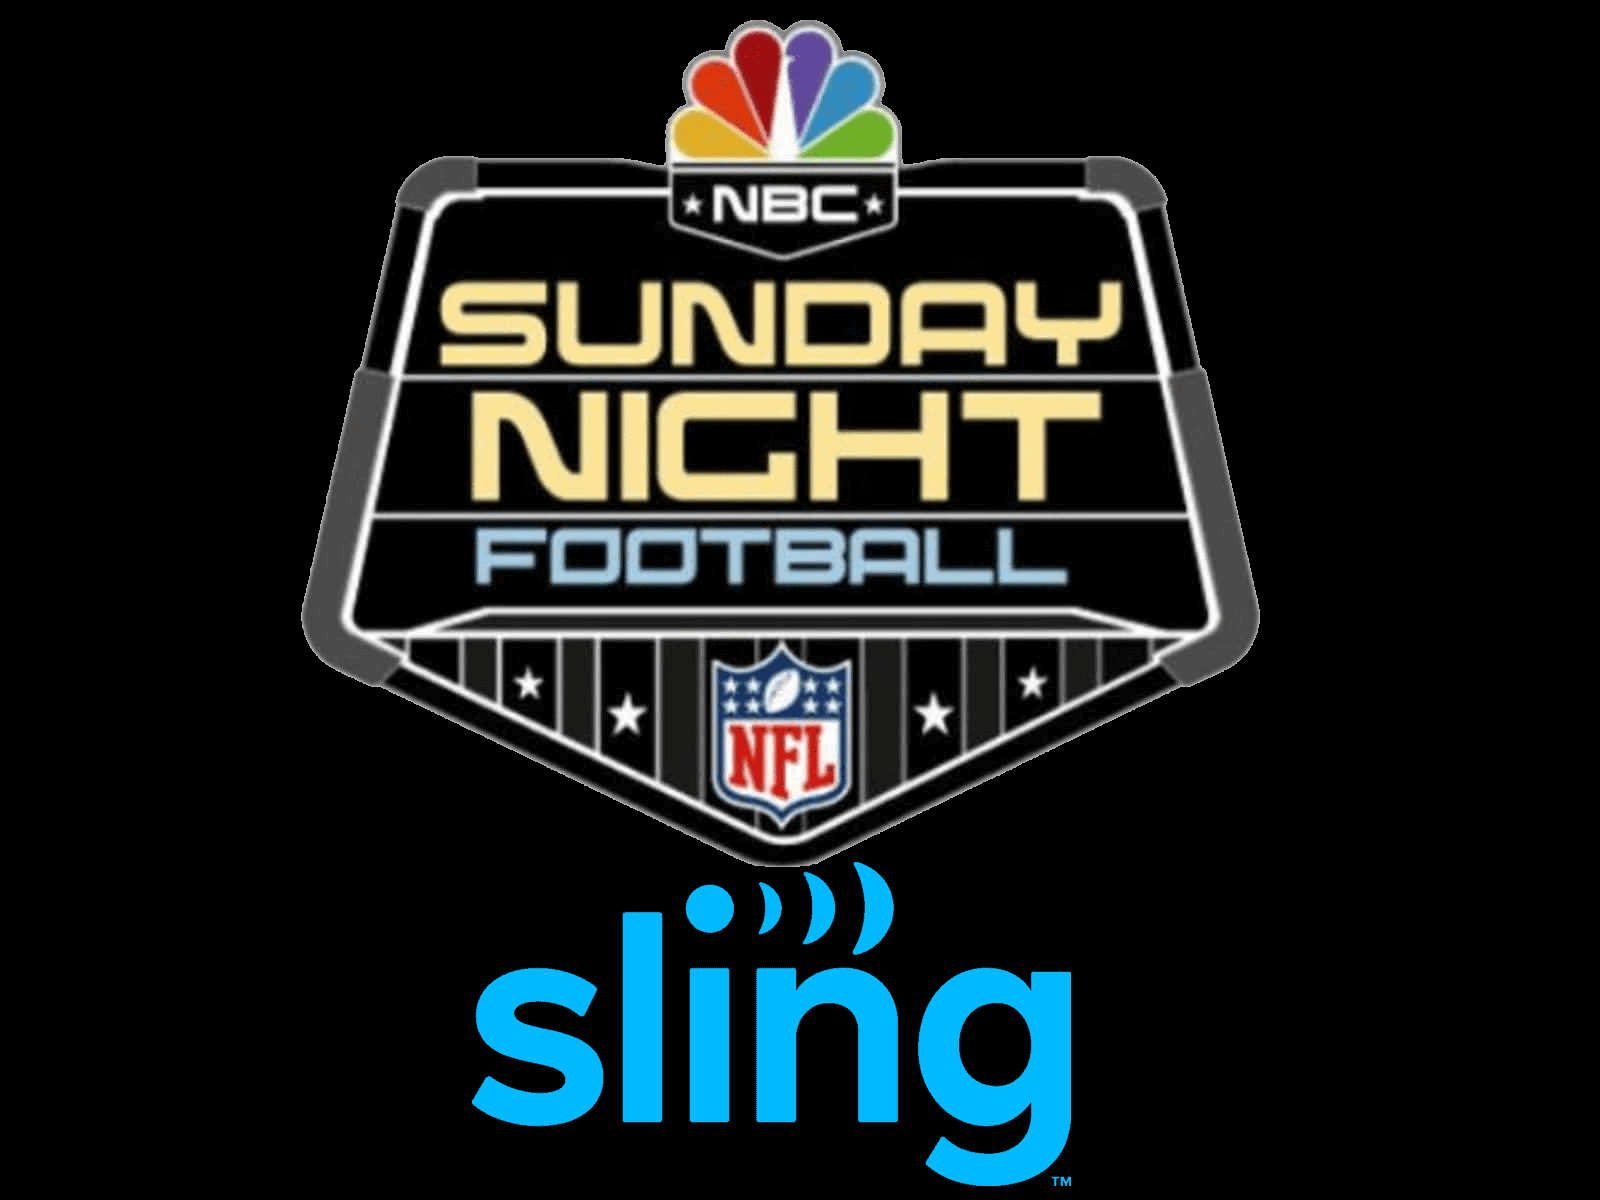 what channel sunday night football on